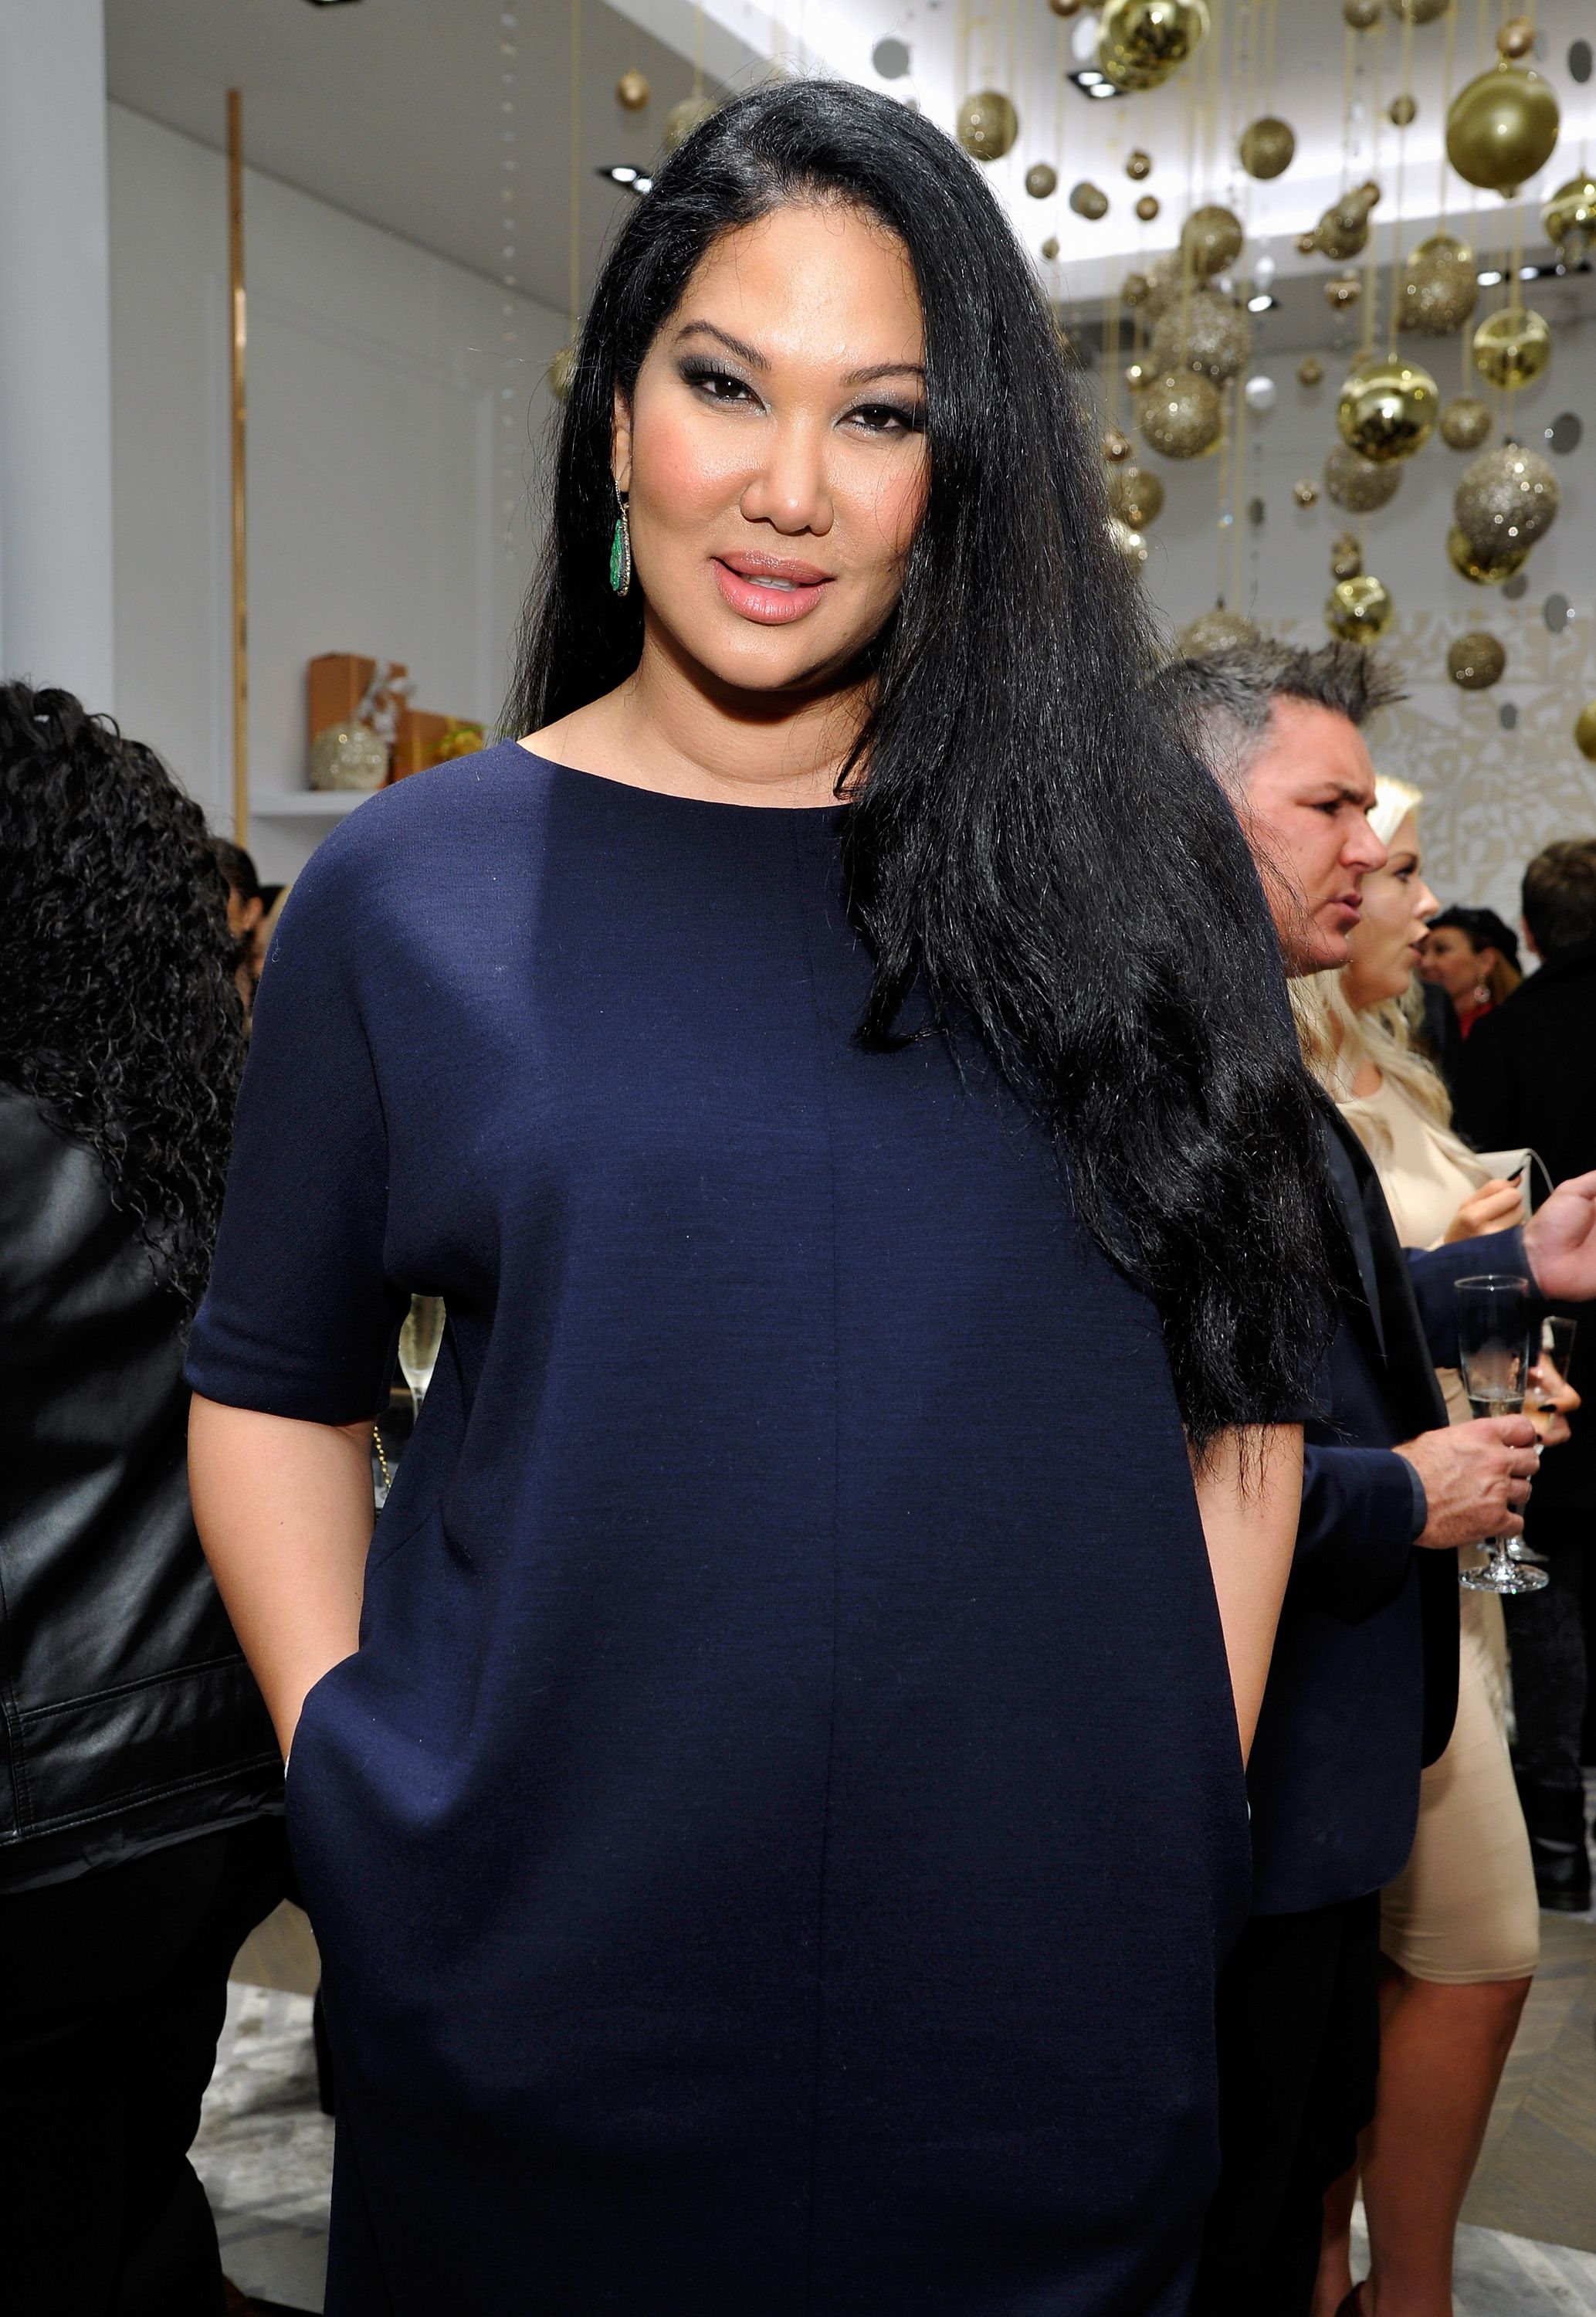 Kimora Lee Simmons at the opening of Kimora Lee Simmons' Beverly Hills boutique with W Magazine on December 10, 2015 | Photo: Getty Images